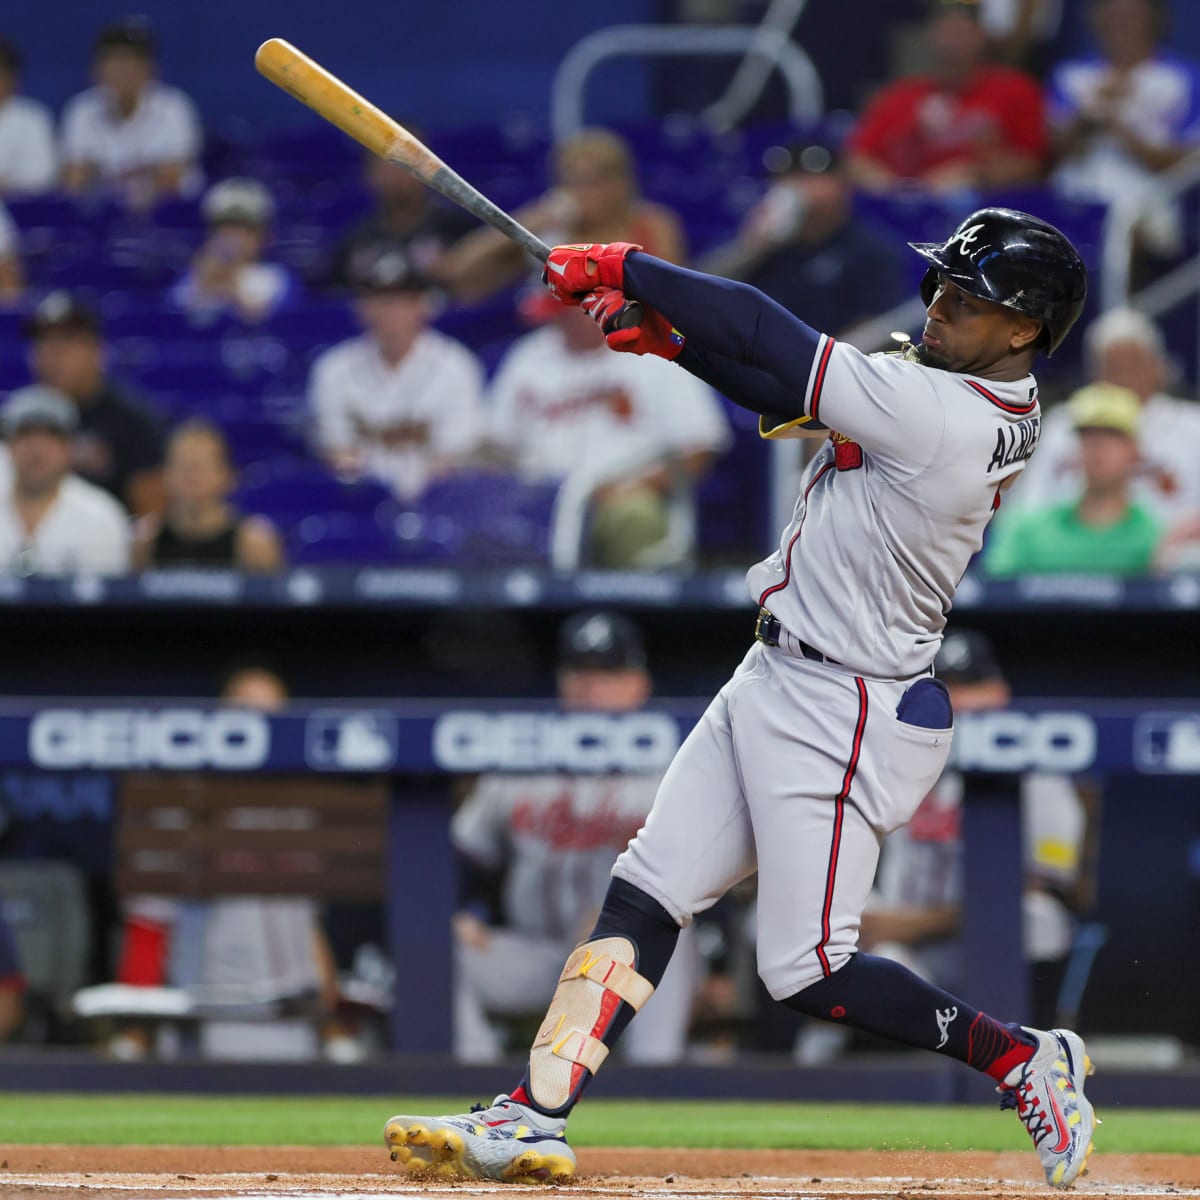 WATCH: Ozzie Albies gets the Braves going with a long homer